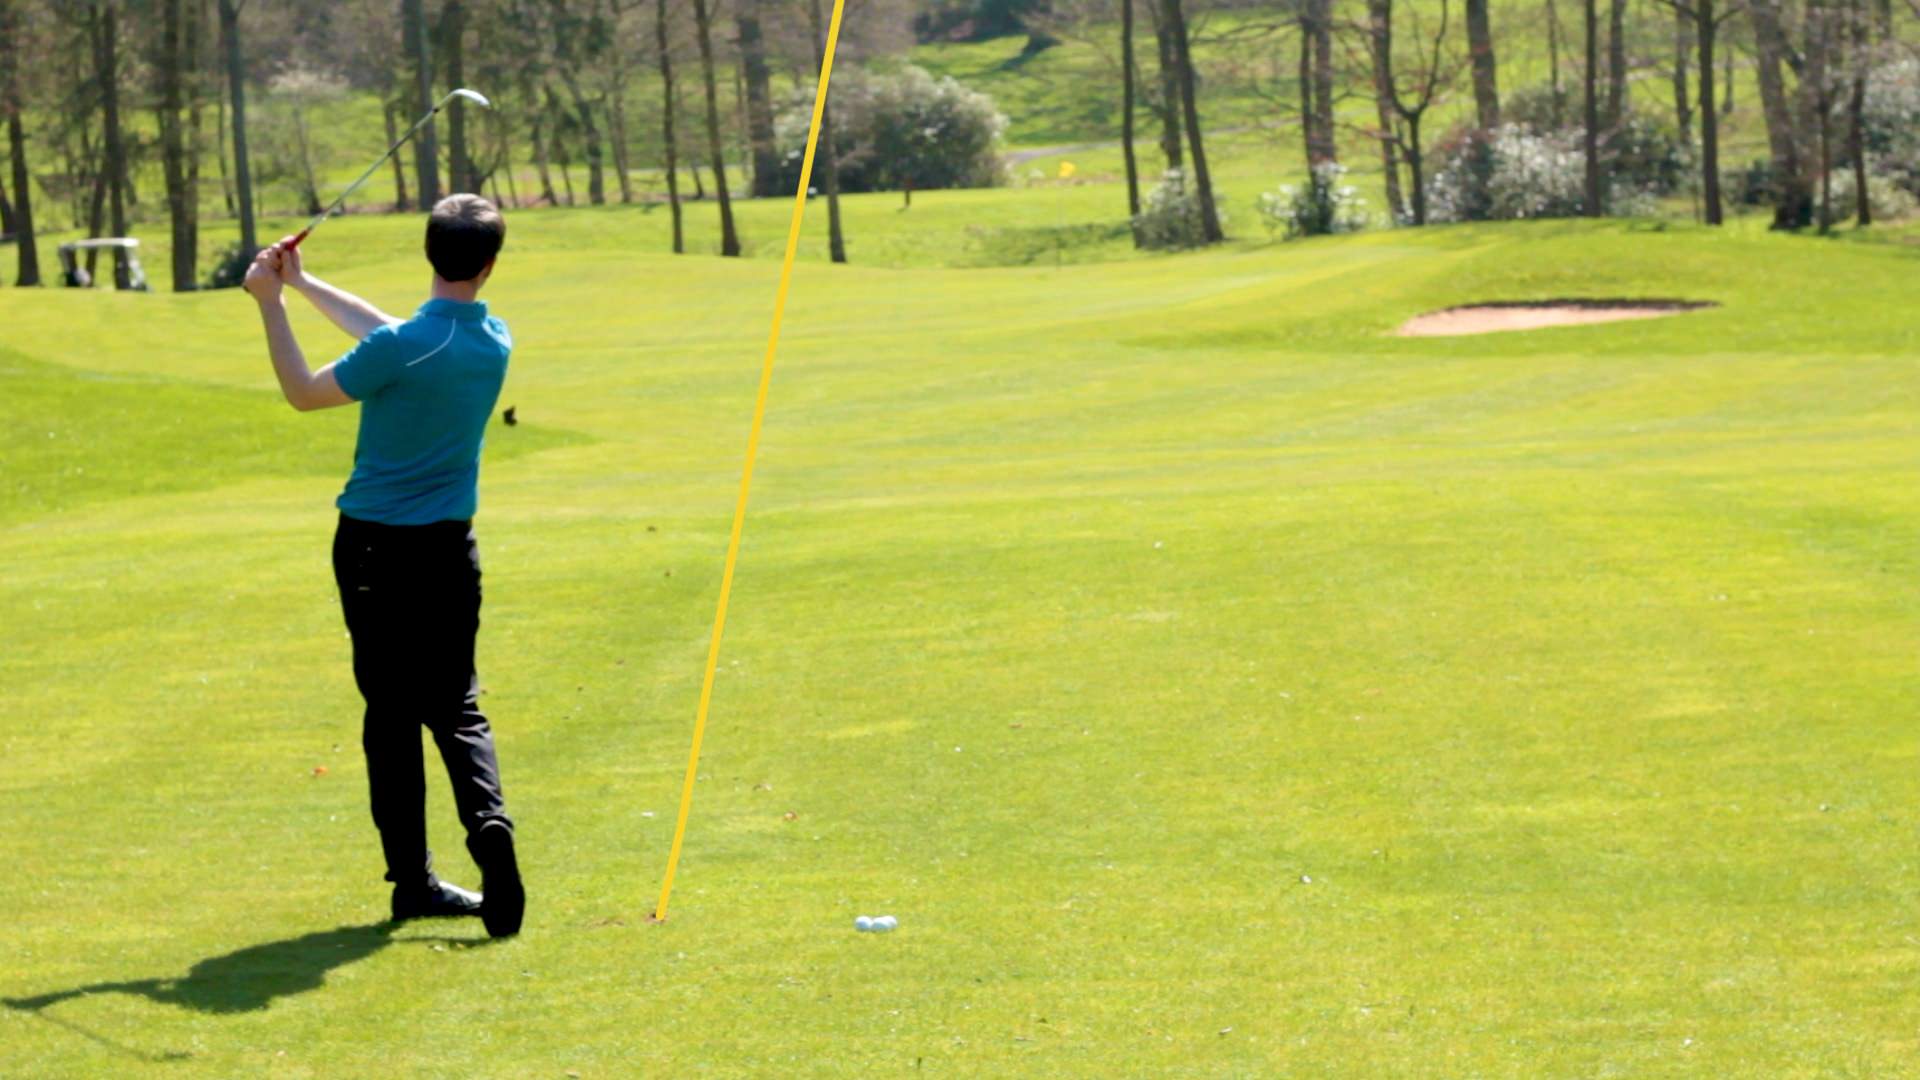 How to hit the 75 yard wedge shot